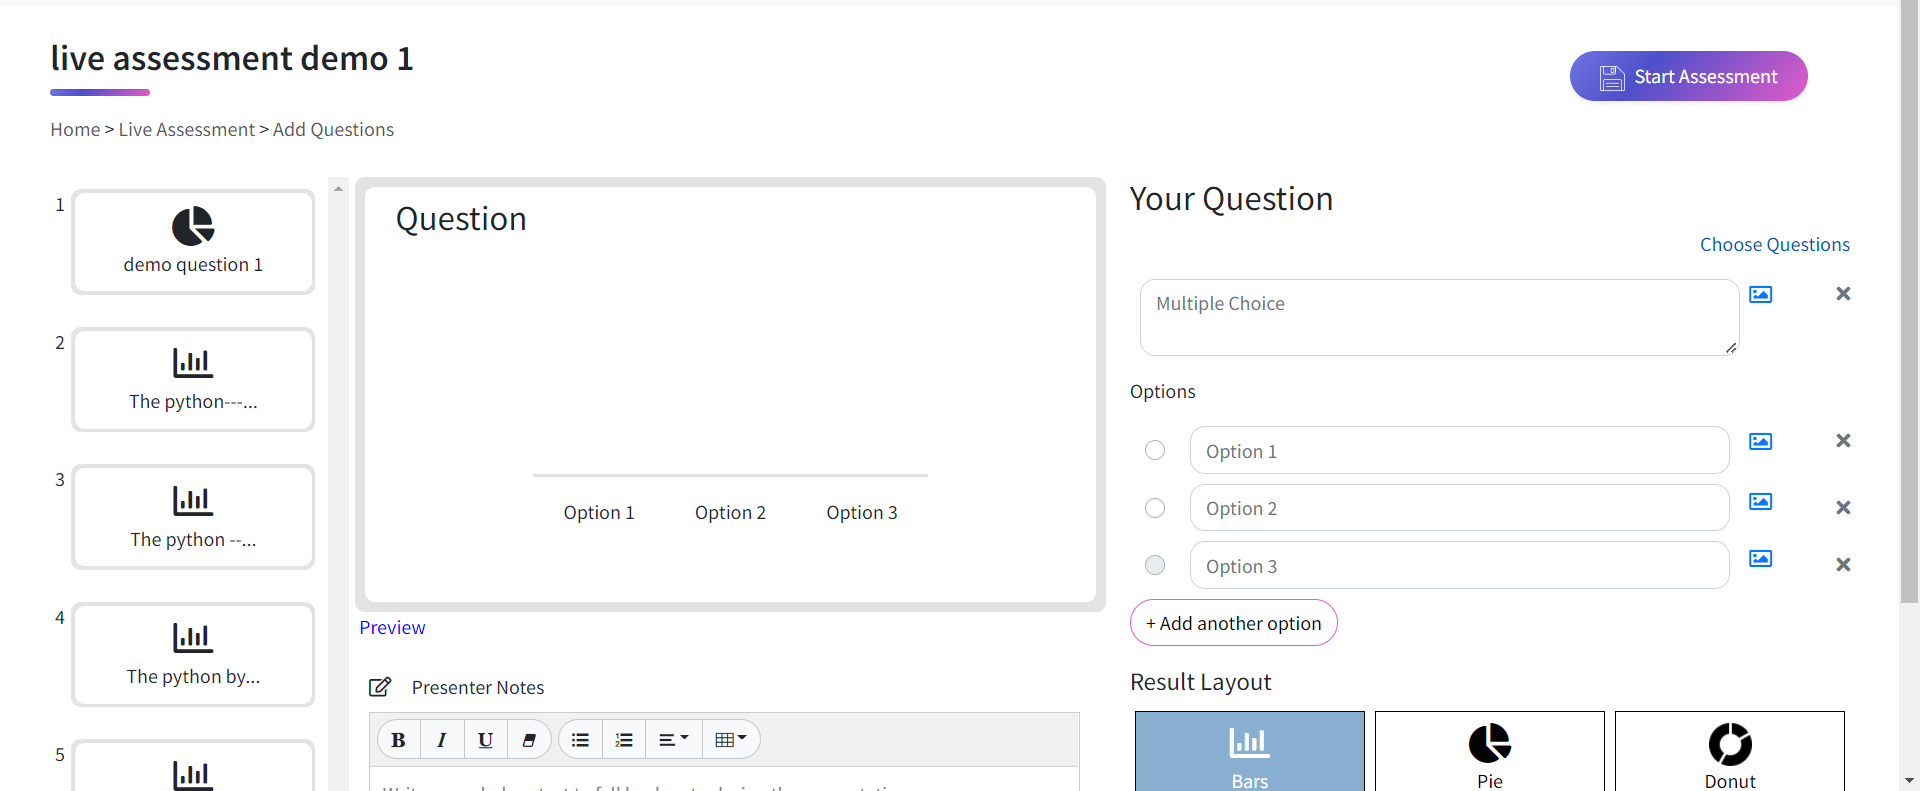 14. To select the existing questions from the subject, click on the 'Choose Questions' option given on the right.